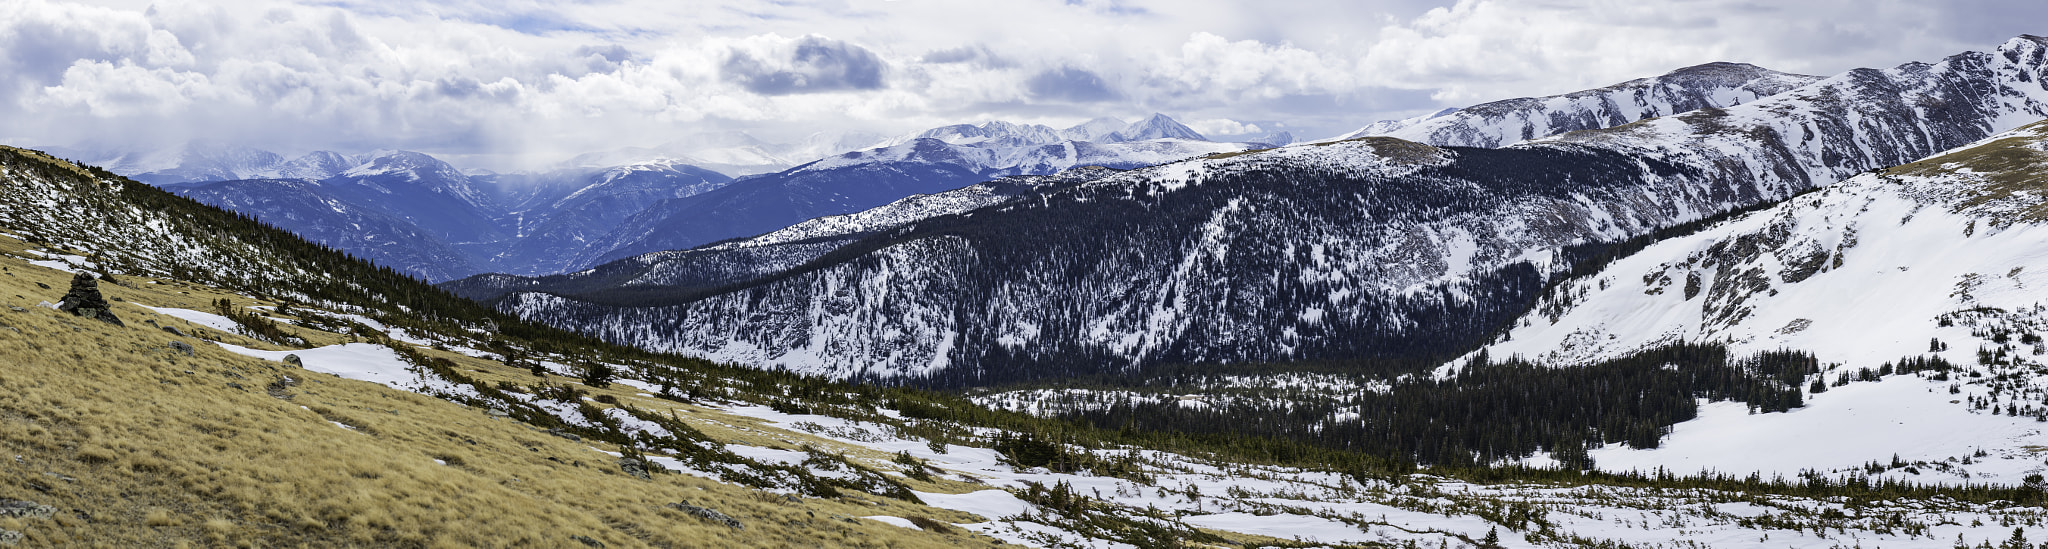 Nikon D600 sample photo. View from the top of saint mary's glacier photography